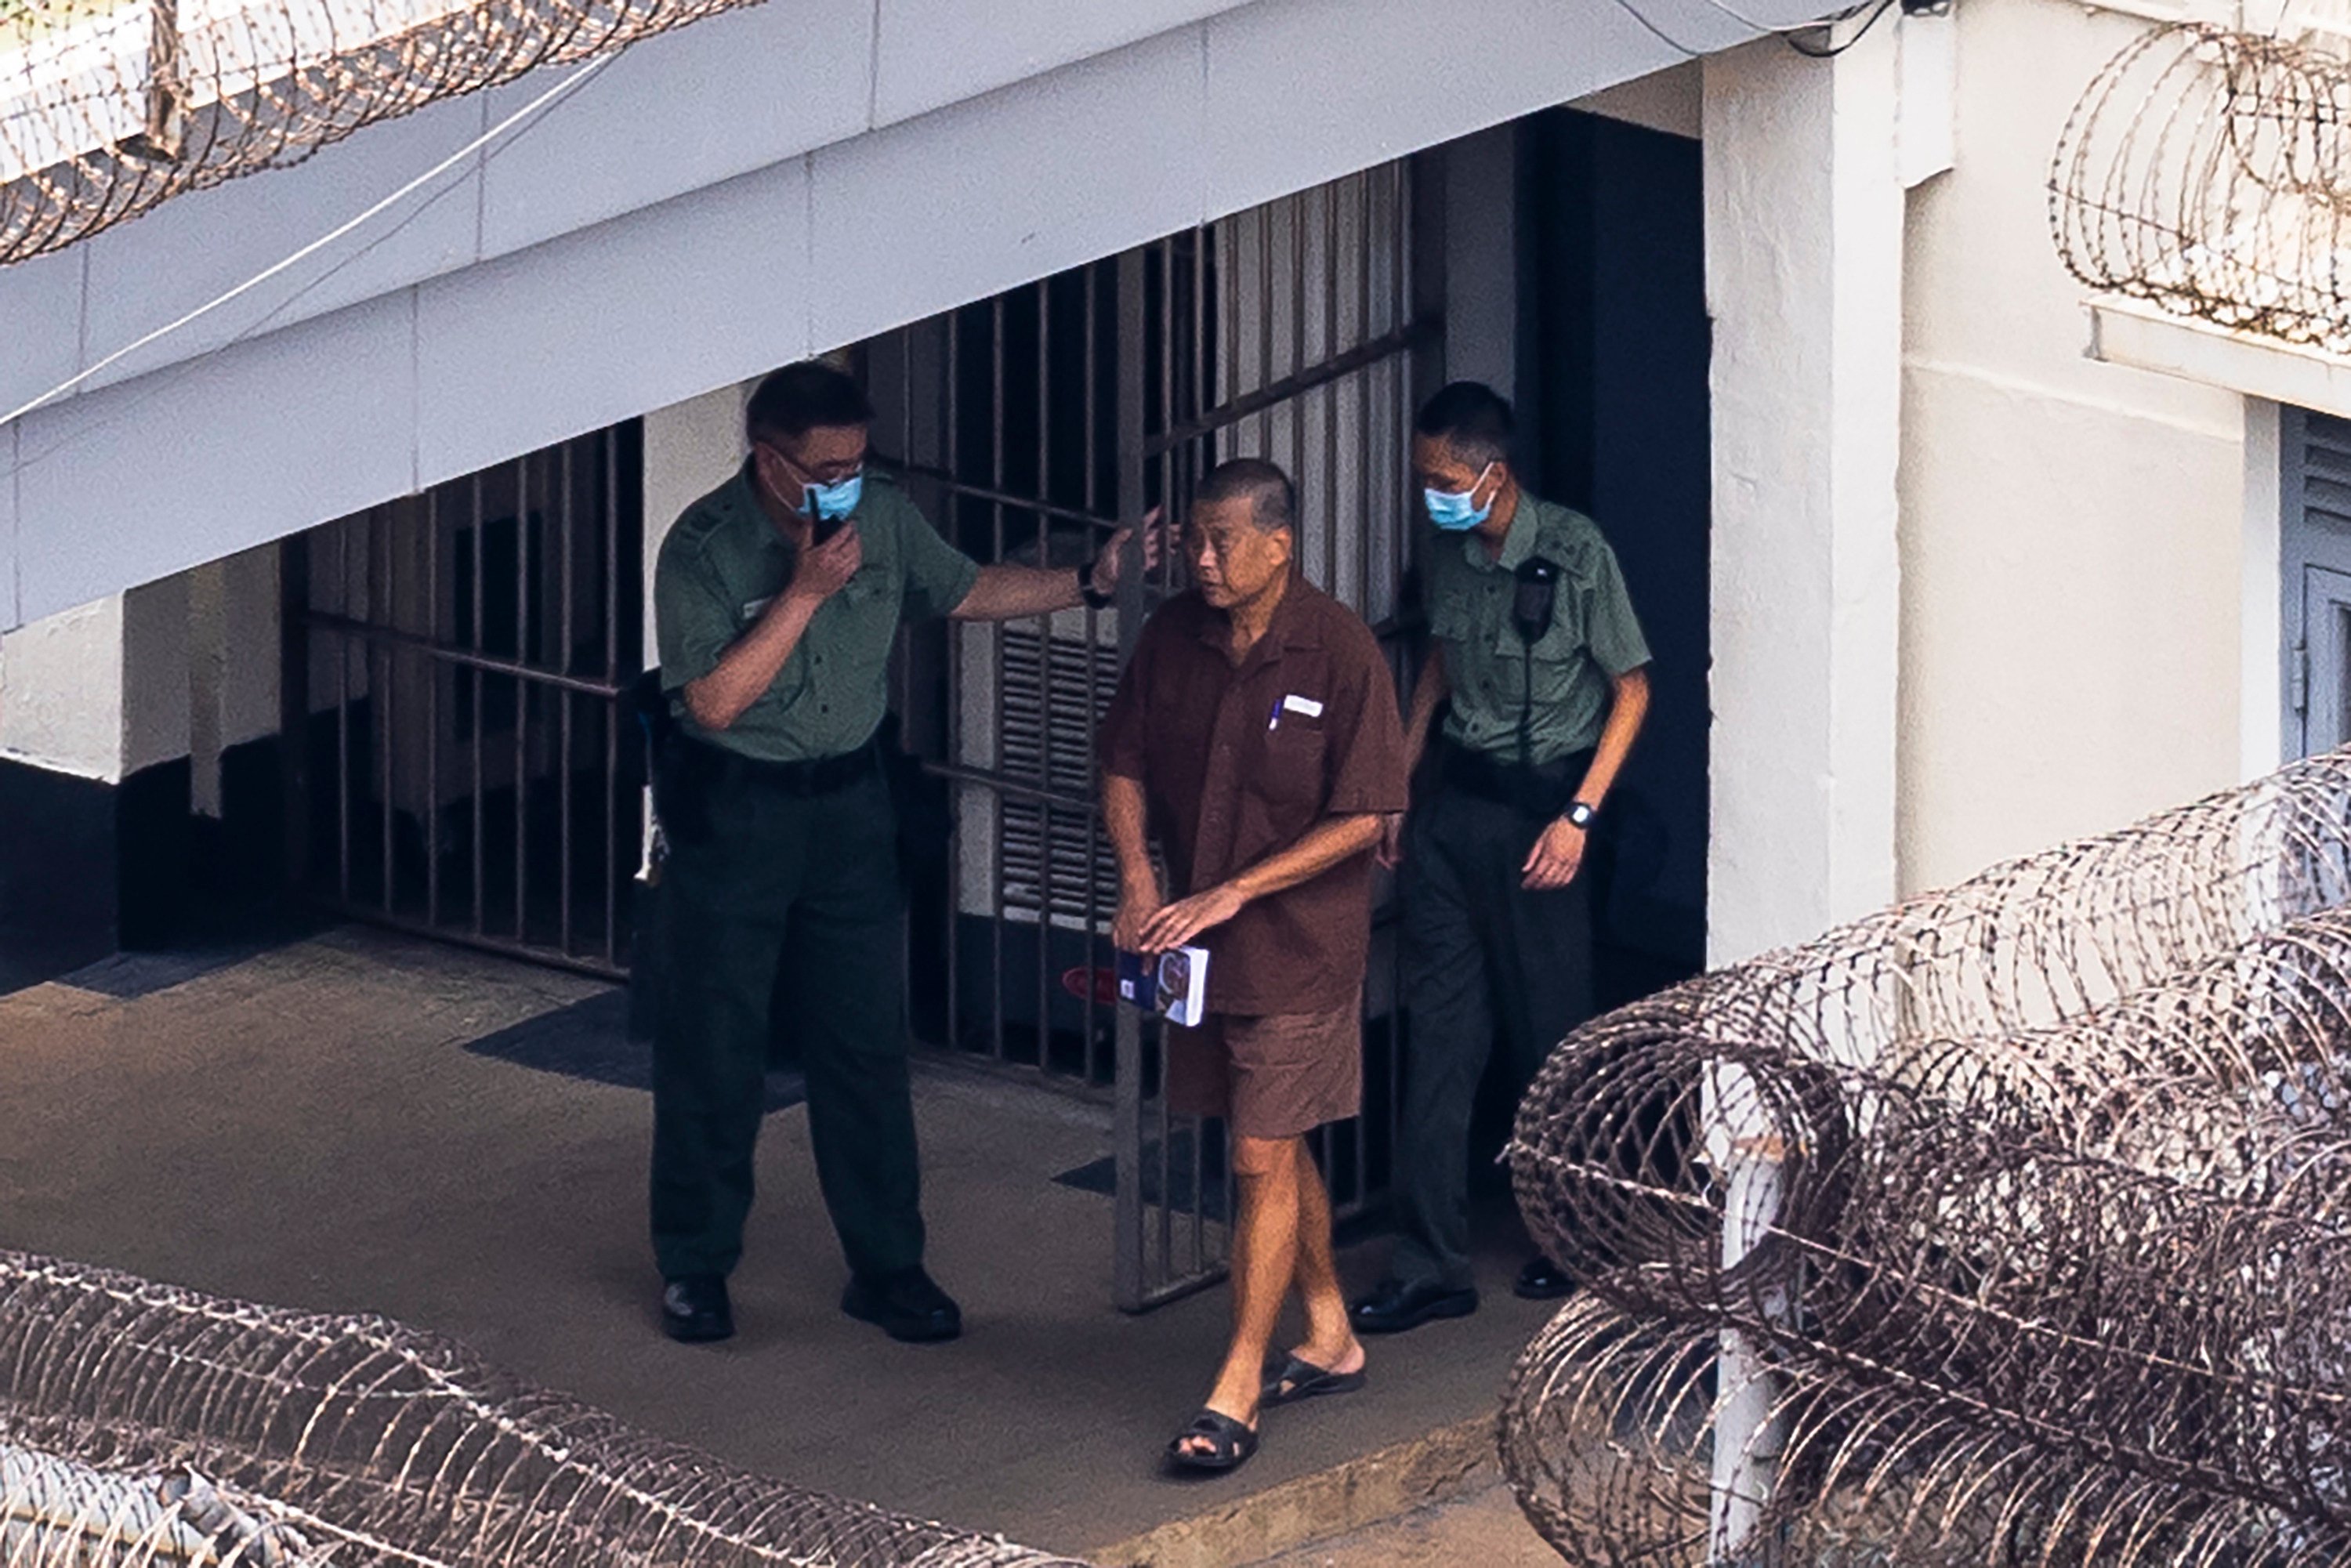 Jimmy Lai is seen in Stanley prison, Hong Kong, on July 28. He has been convicted of fraud and is awaiting trial on charges of sedition and conspiracy to collude with foreign forces. Photo: AP